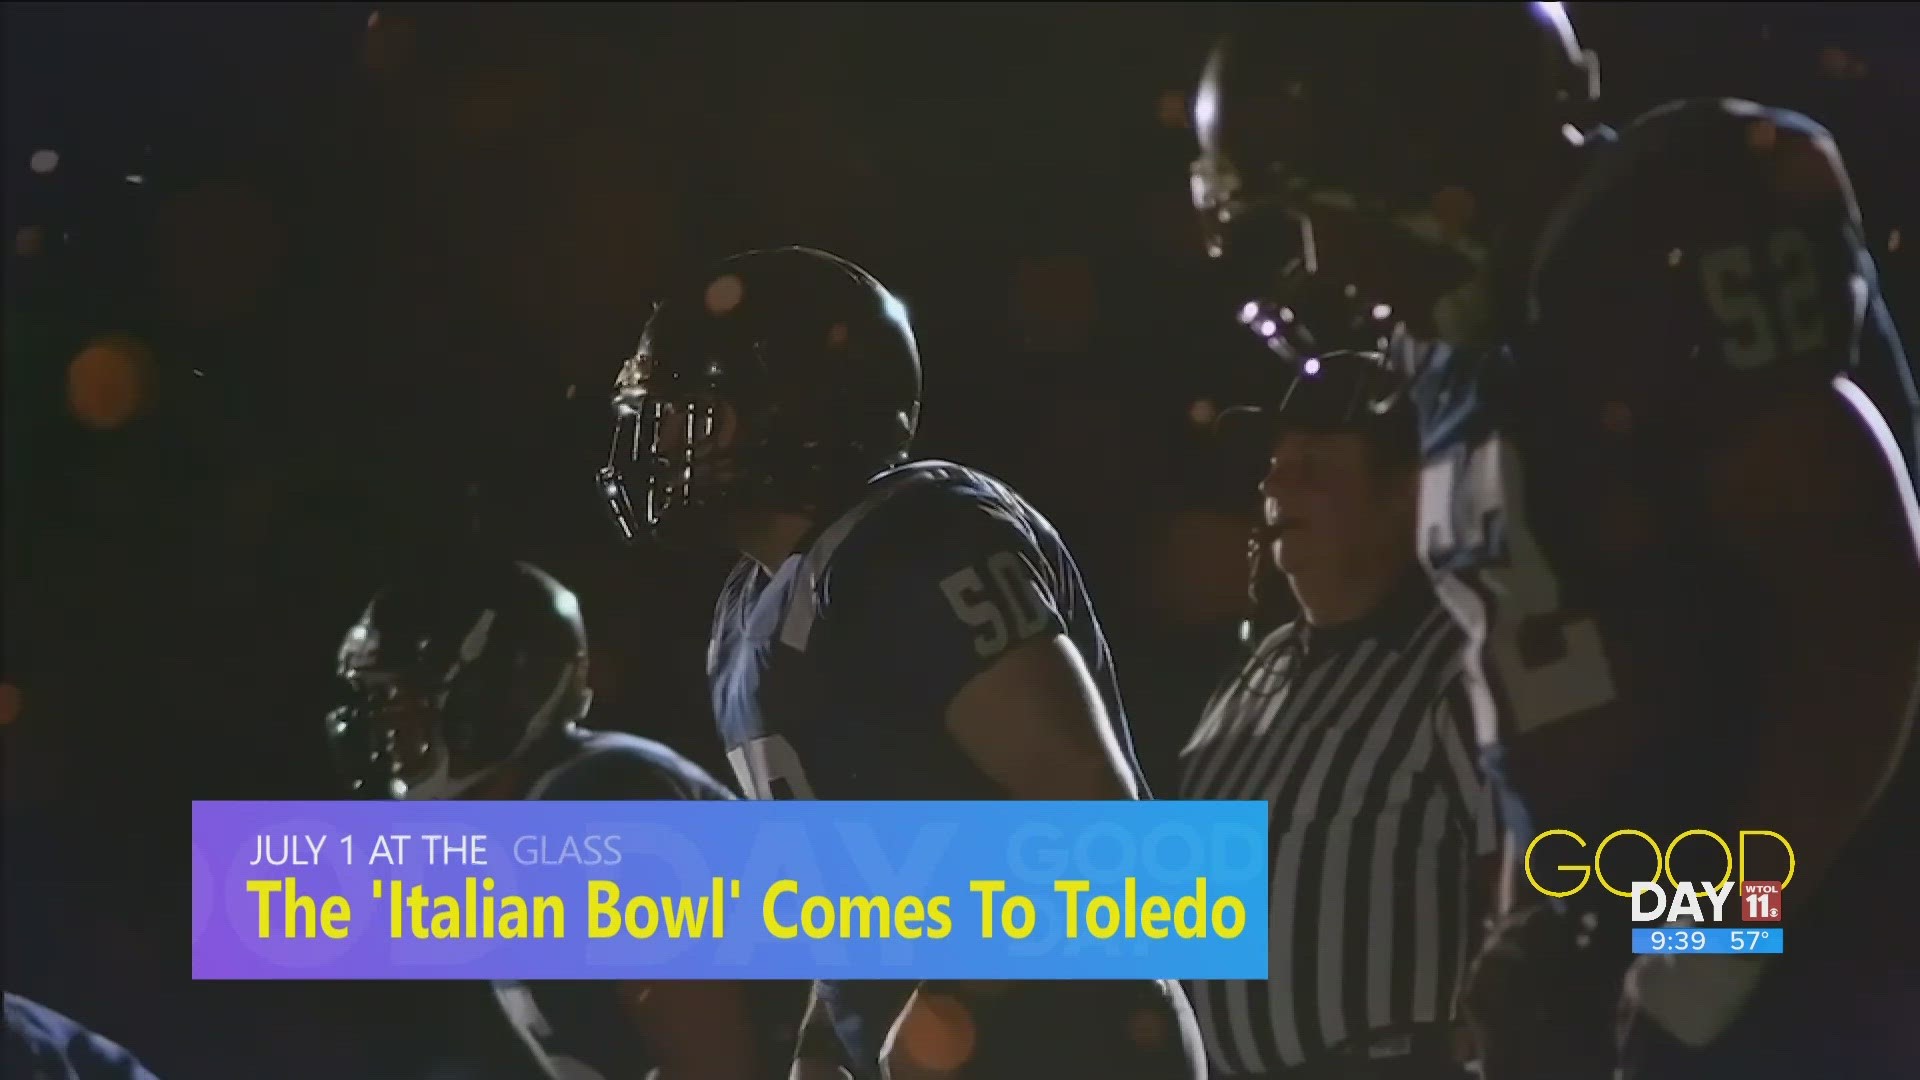 Director of operations for the 'Italian Bowl' Pat Nowak talks about the Glass City's opportunity to host an Italian football game.